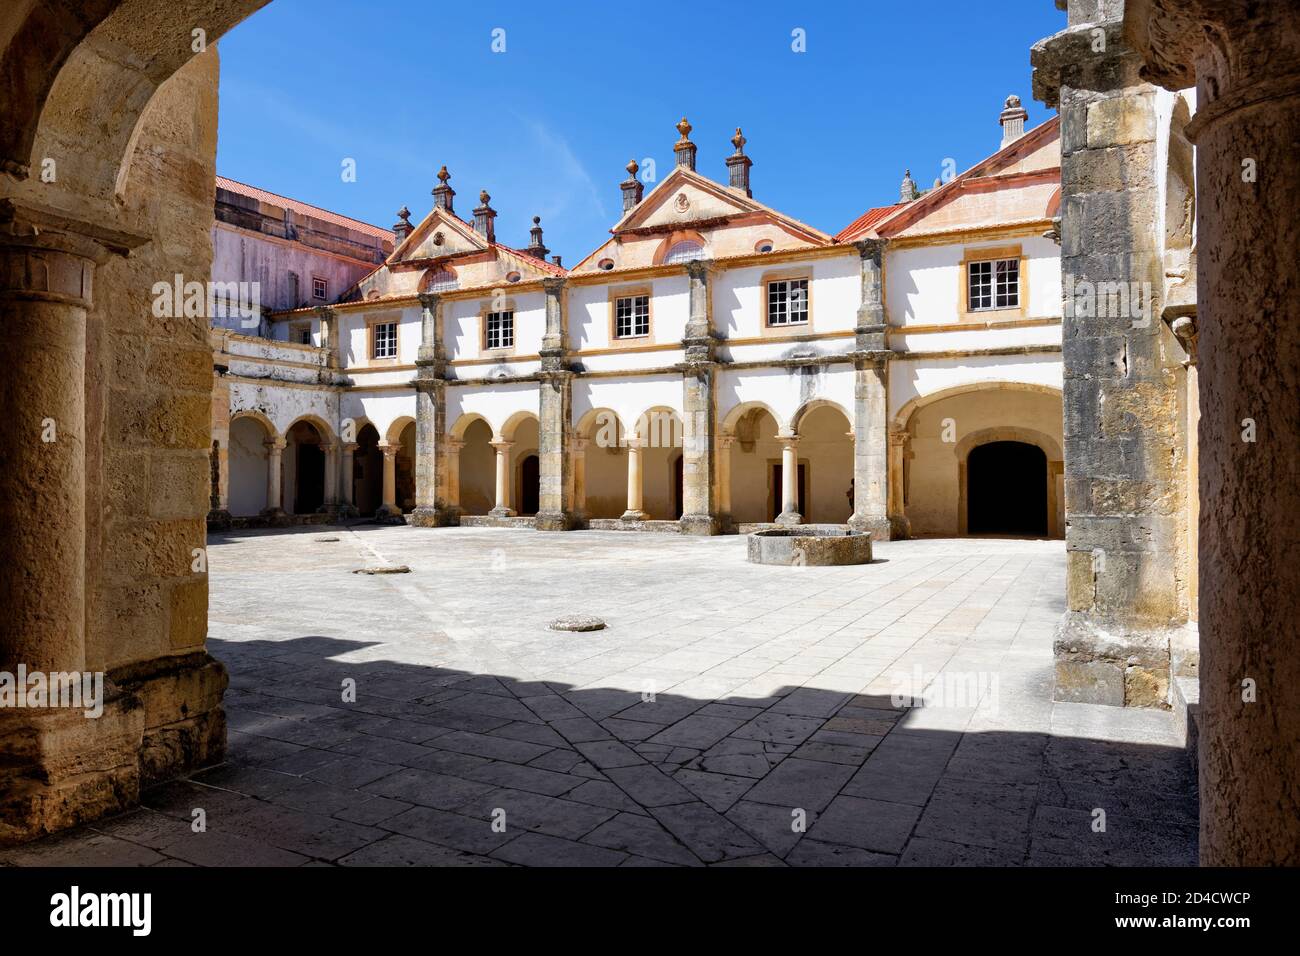 Micha Cloister, Courtyard, Castle and Convent of the Order of Christ, Tomar, Santarem district, Portugal Stock Photo